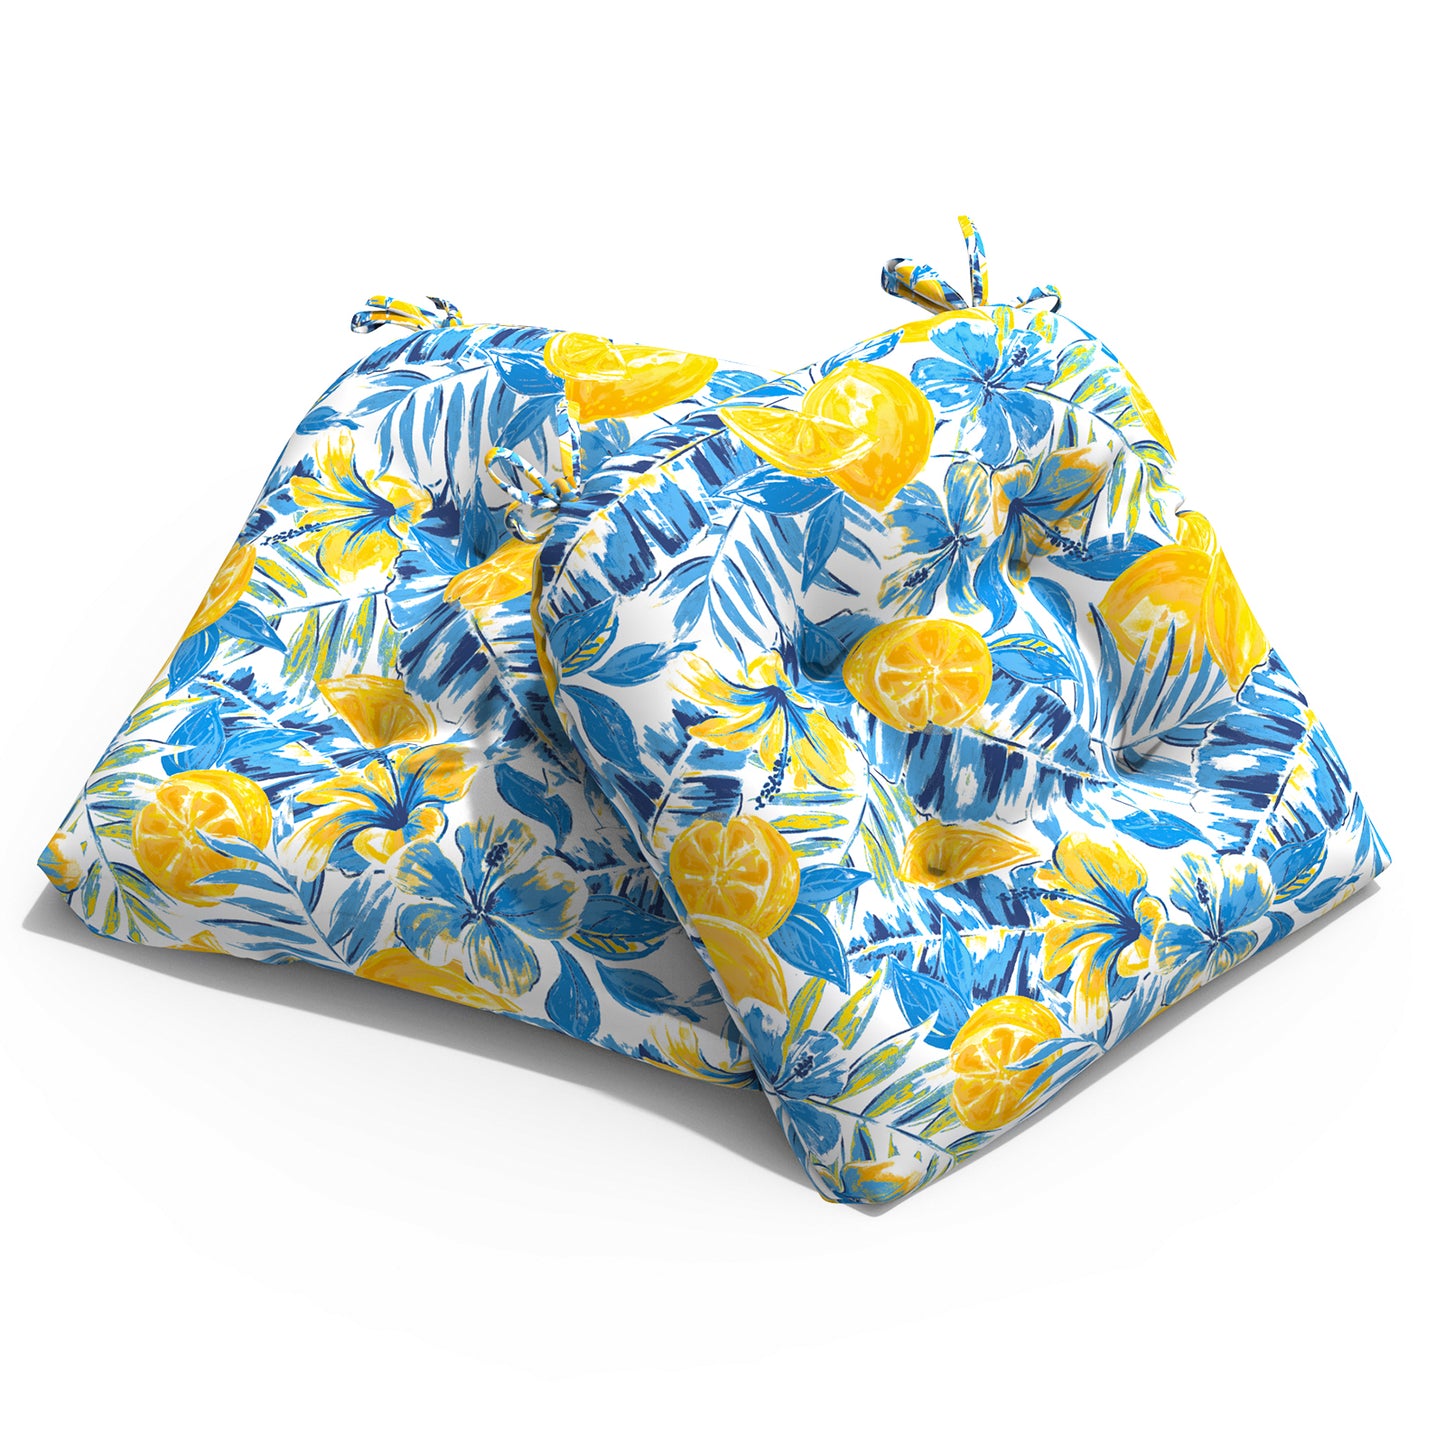 Melody Elephant Patio Wicker Chair Cushions, All Weather Outdoor Tufted Chair Pads Pack of 2, 19 x 19 x 5 Inch U-Shaped Seat Cushions of Garden Furniture Decoration, Lemon Blossom Blue